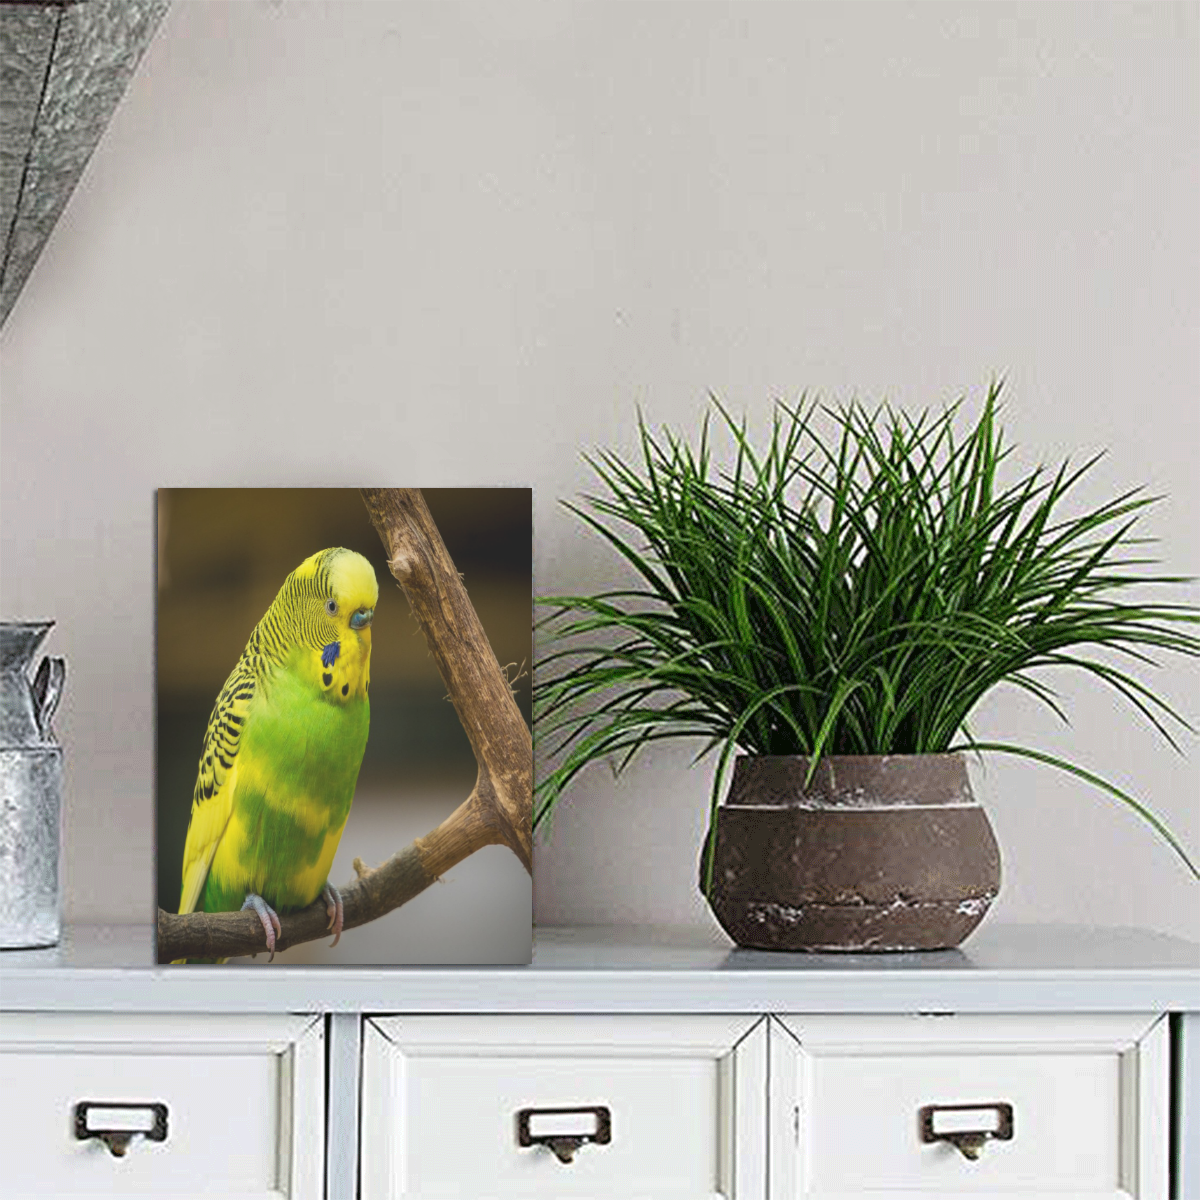 Pretty Parakeet Photo Panel for Tabletop Display 6"x8"